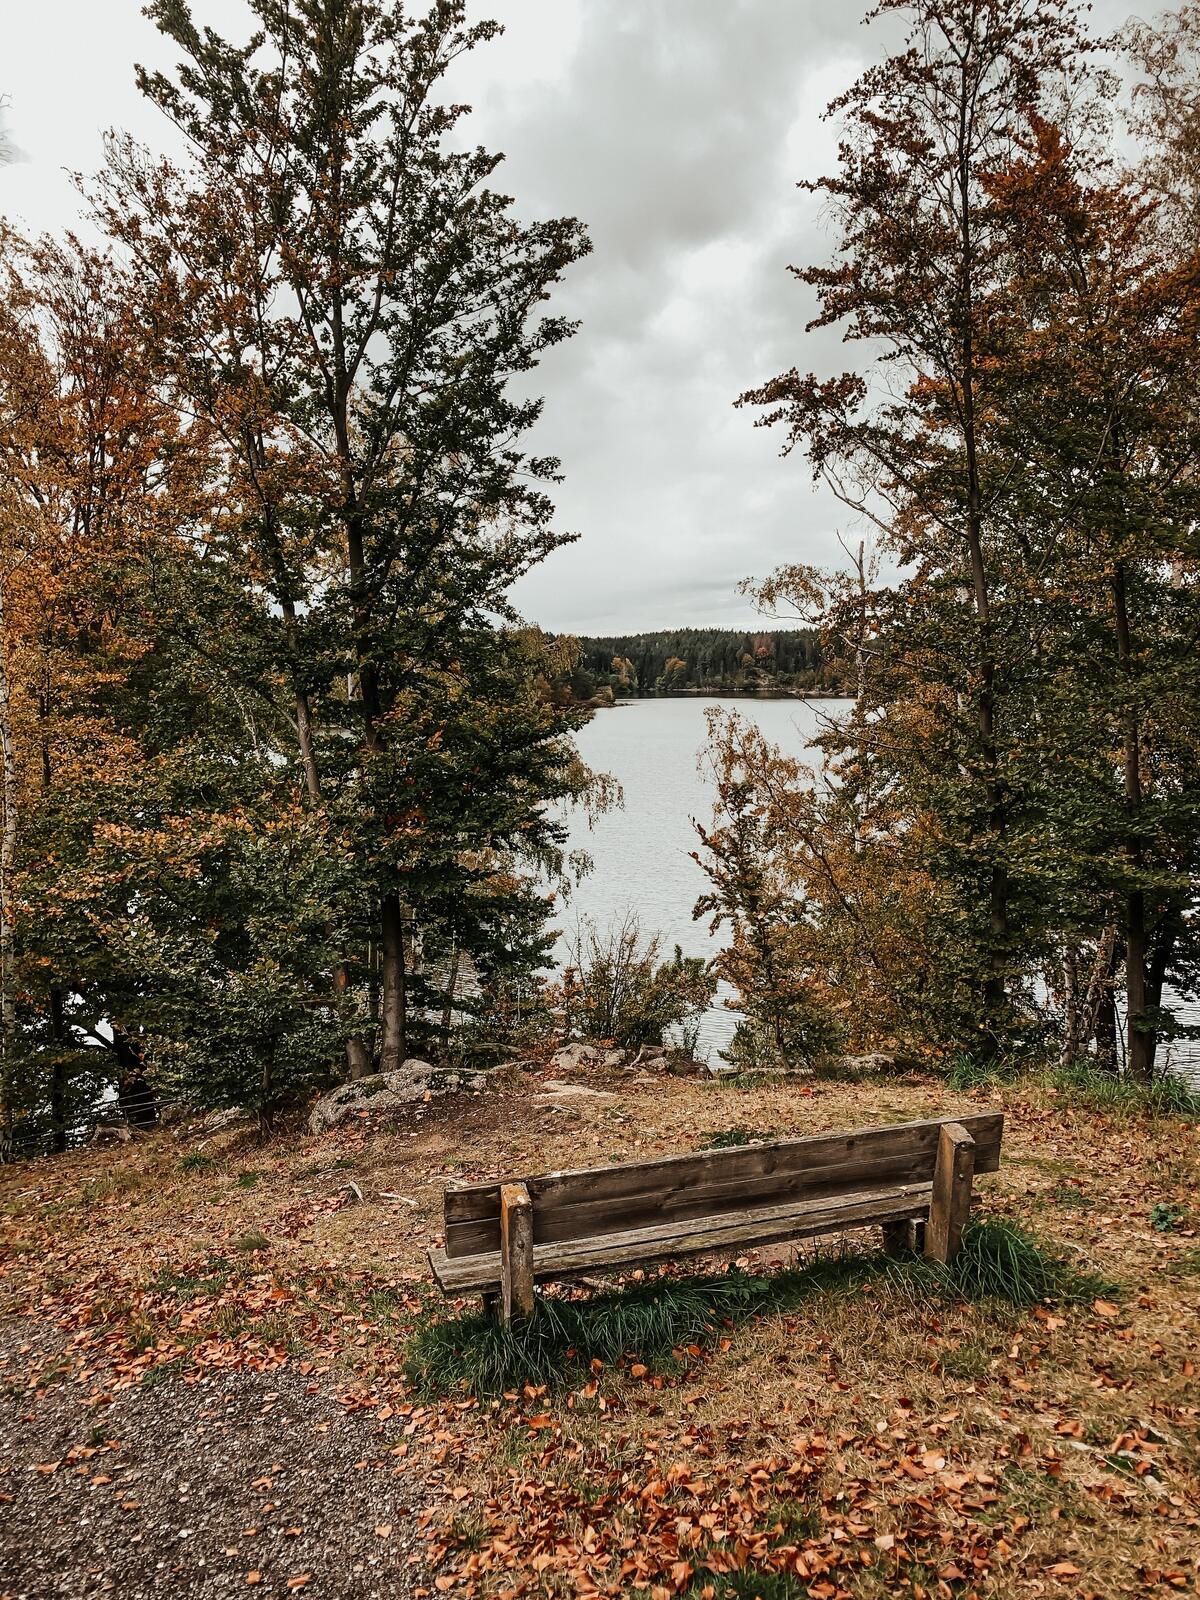 A bench on the shore of the lake with a beautiful landscape